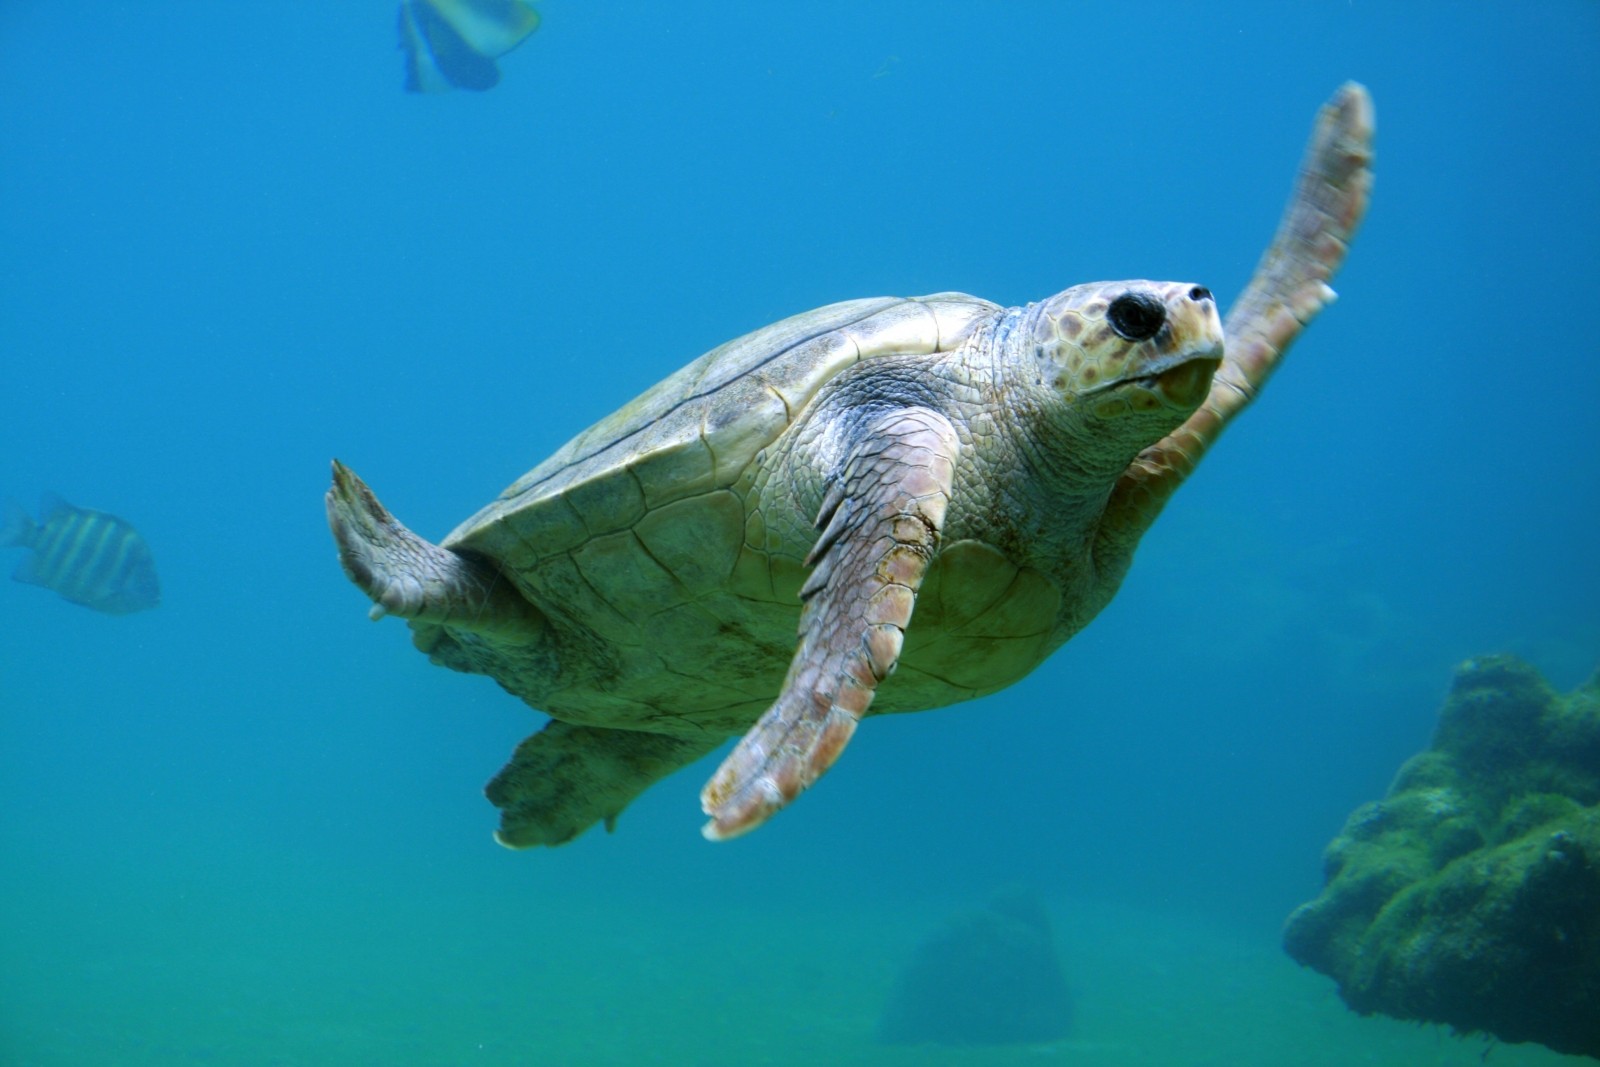 Turtles - one of the many animals at risk of bycatch in fishing nets